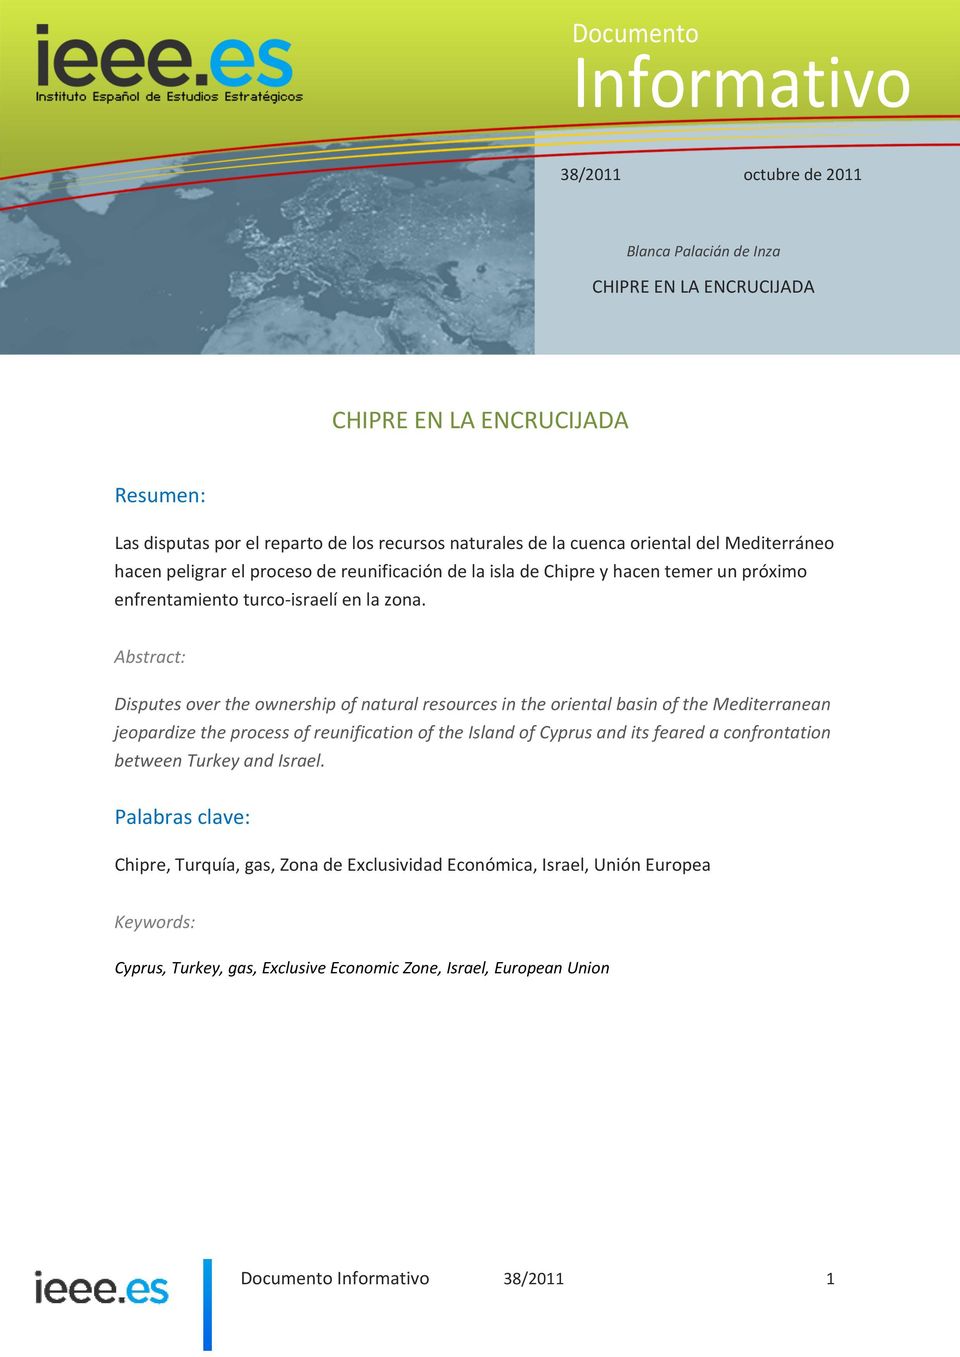 Abstract: Disputes over the ownership of natural resources in the oriental basin of the Mediterranean jeopardize the process of reunification of the Island of Cyprus and its feared a